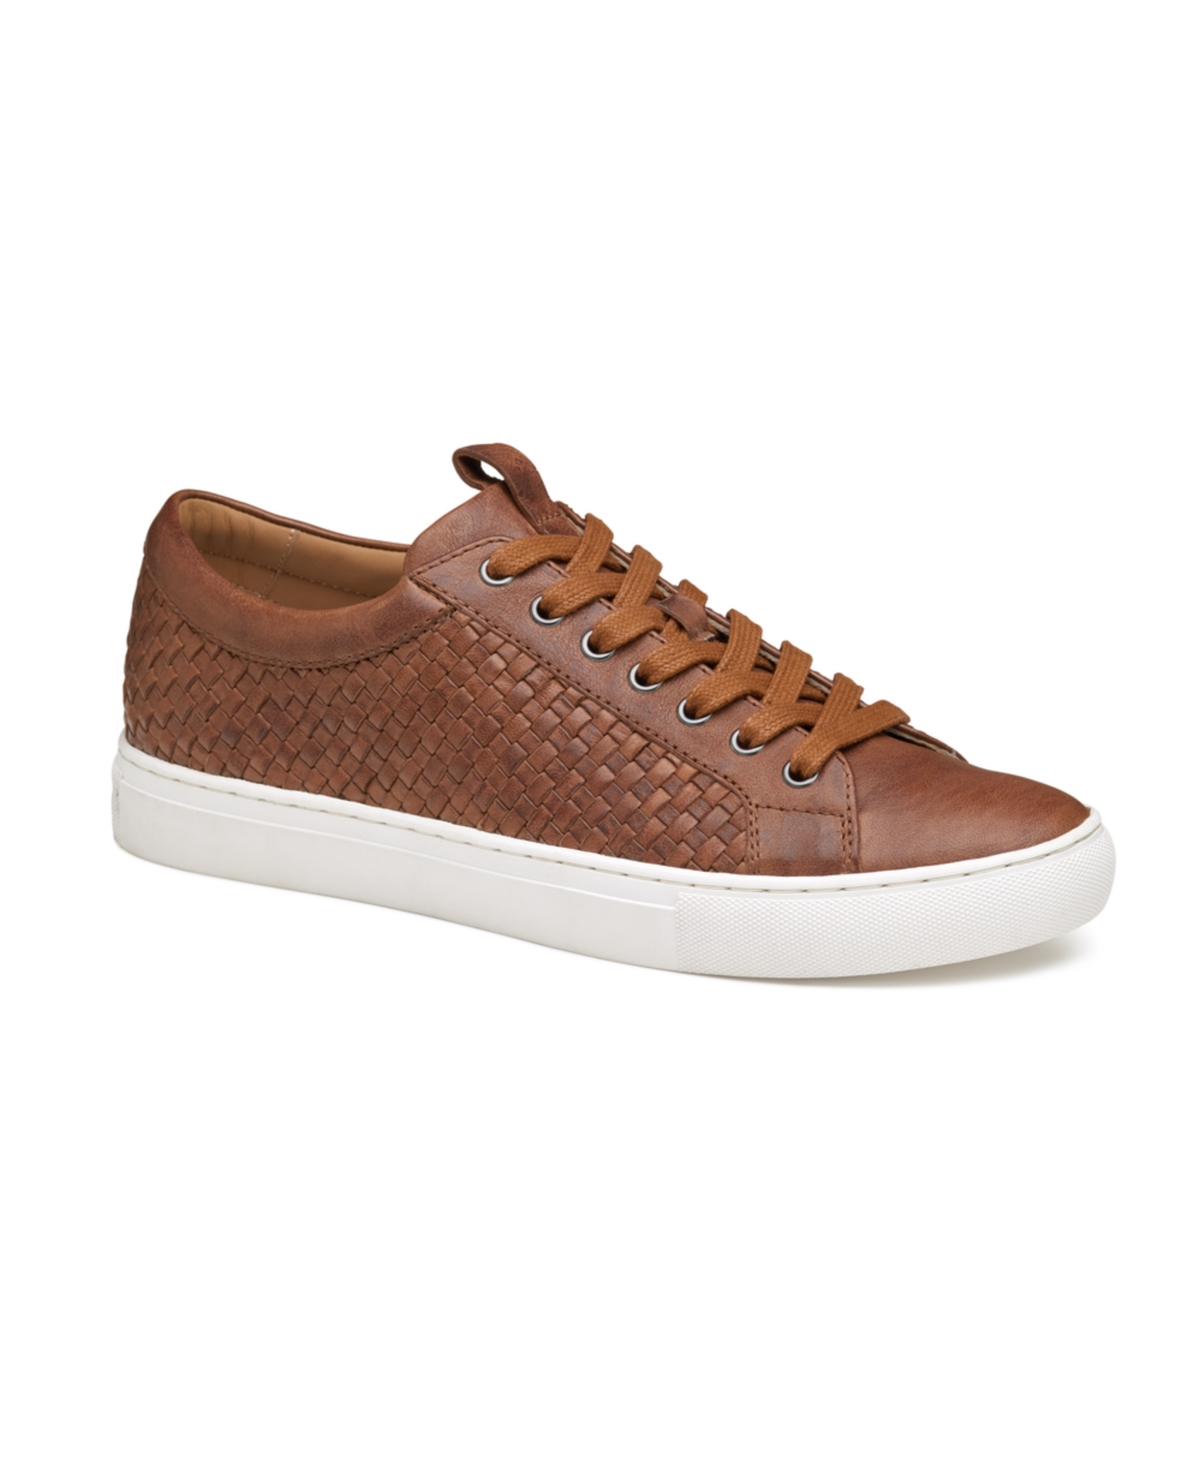 Johnston & Murphy Men's Banks Woven Lace-to-toe Lace-up Sneakers In Tan